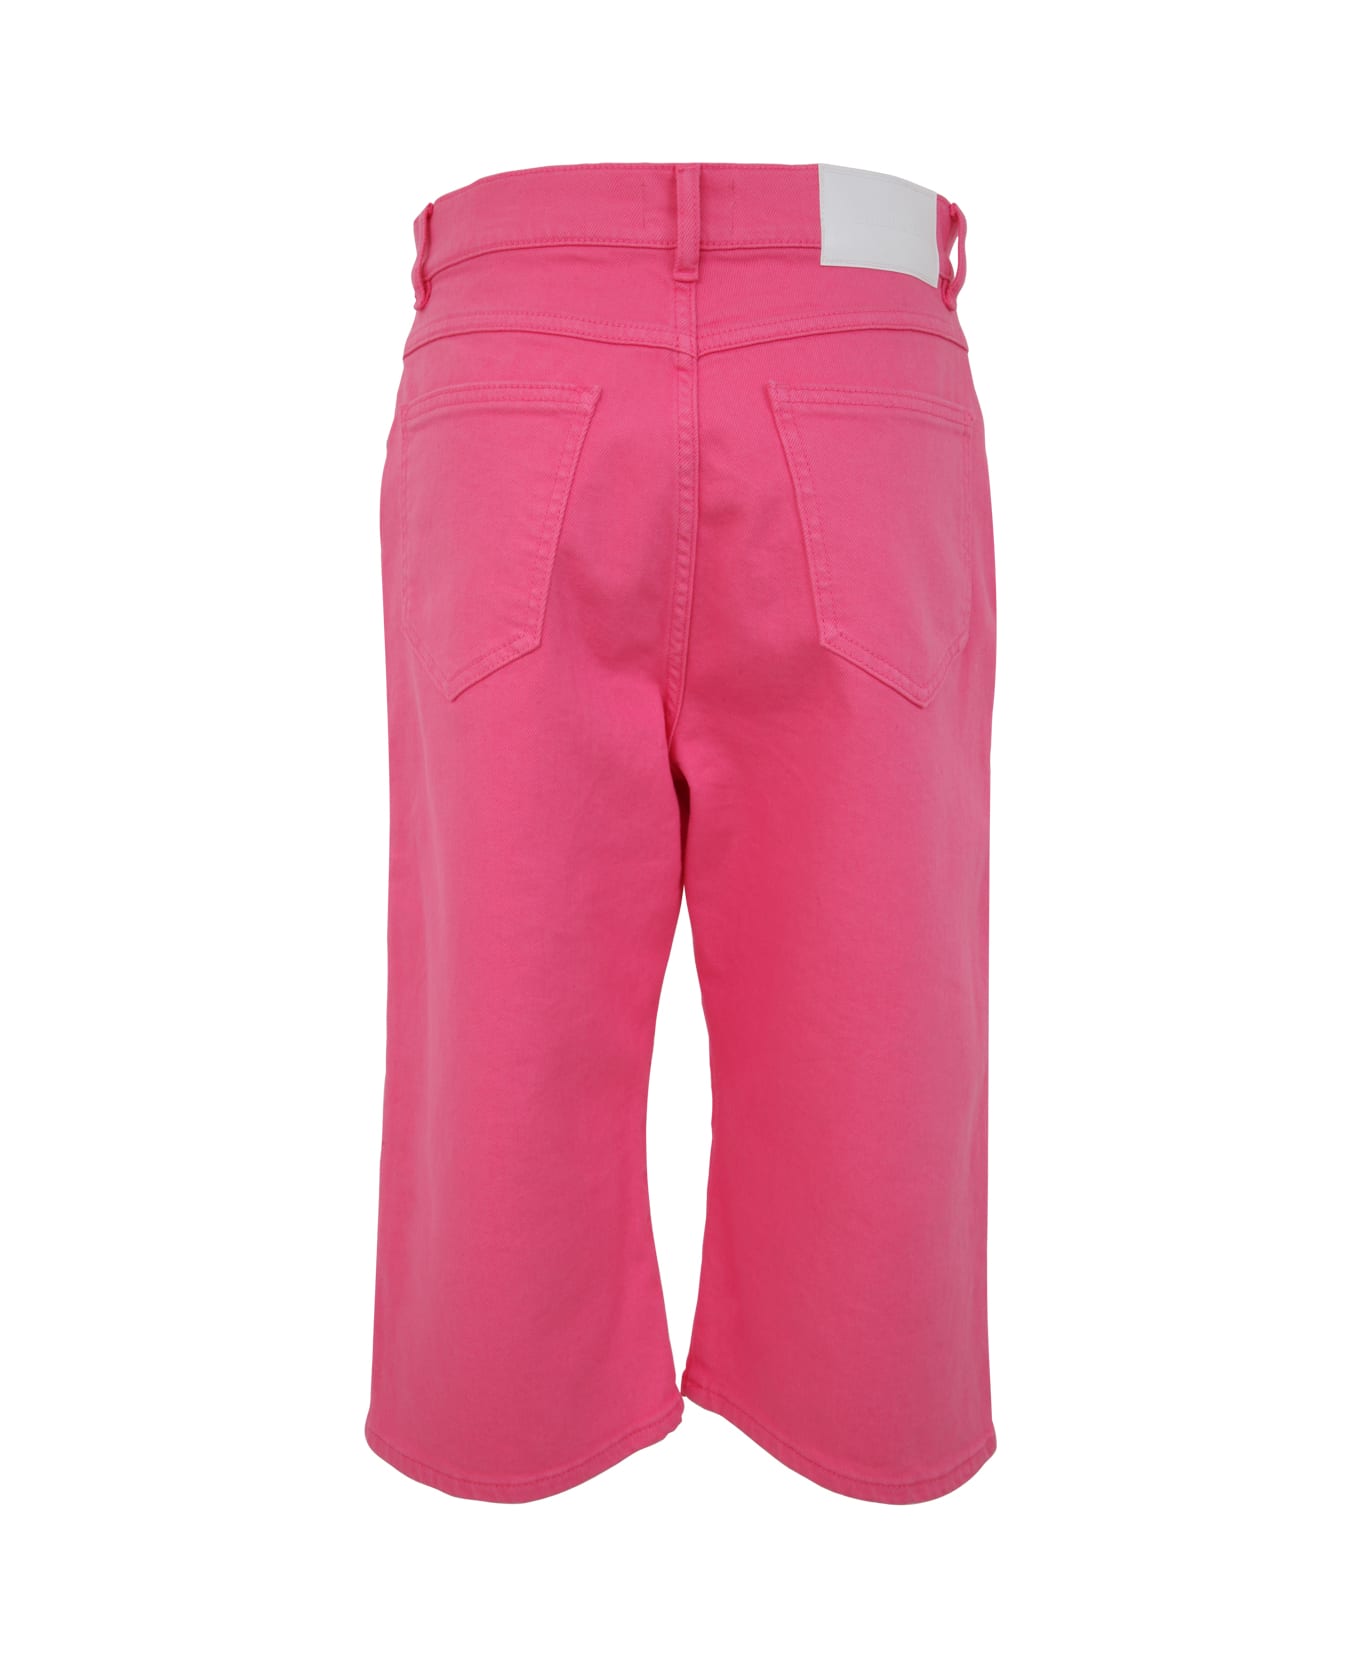 Parosh Drill Cotton Trousers - Pink